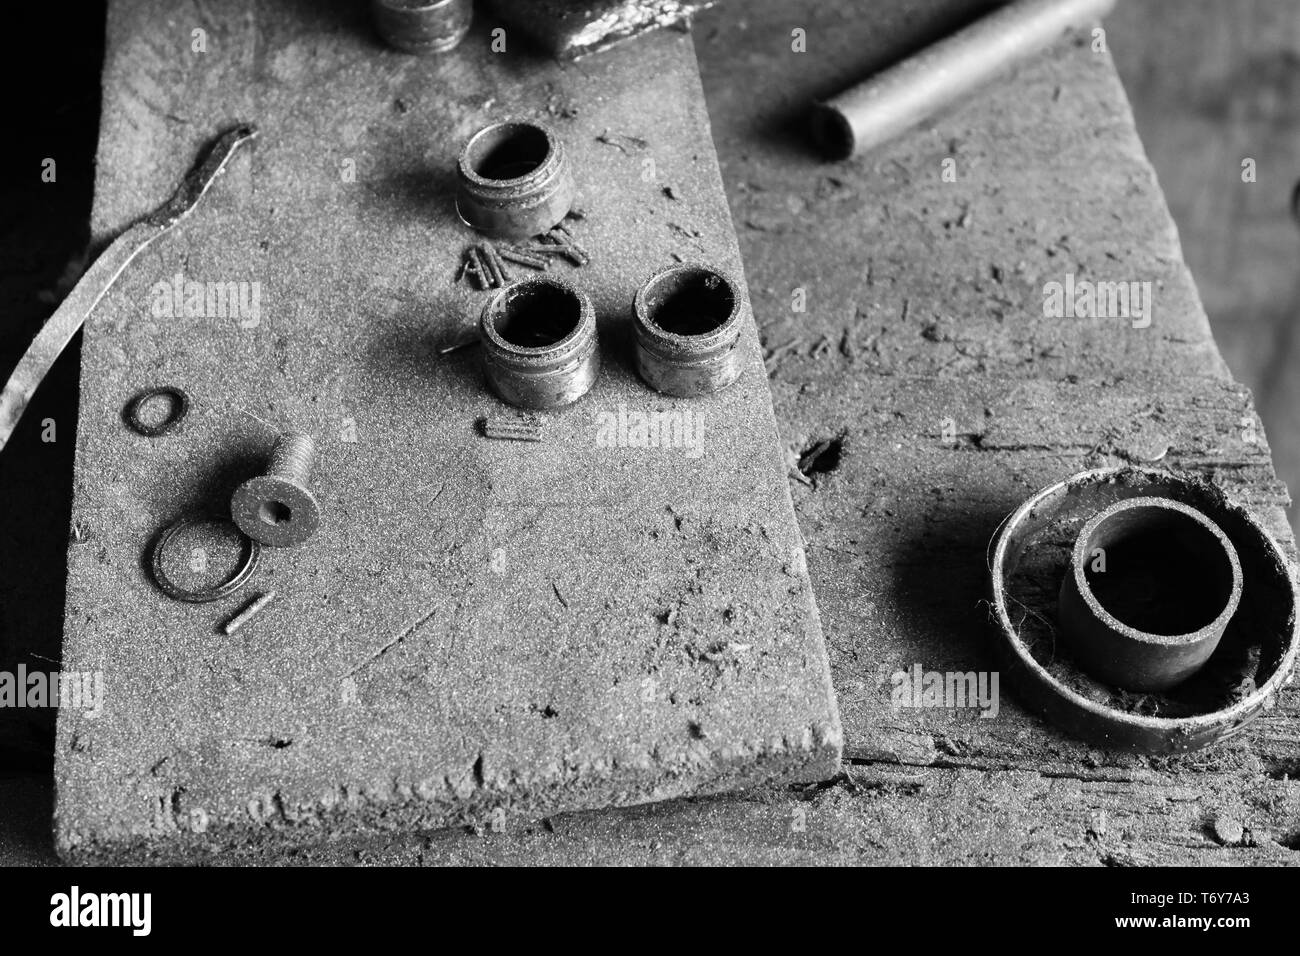 old screws and nuts Stock Photo